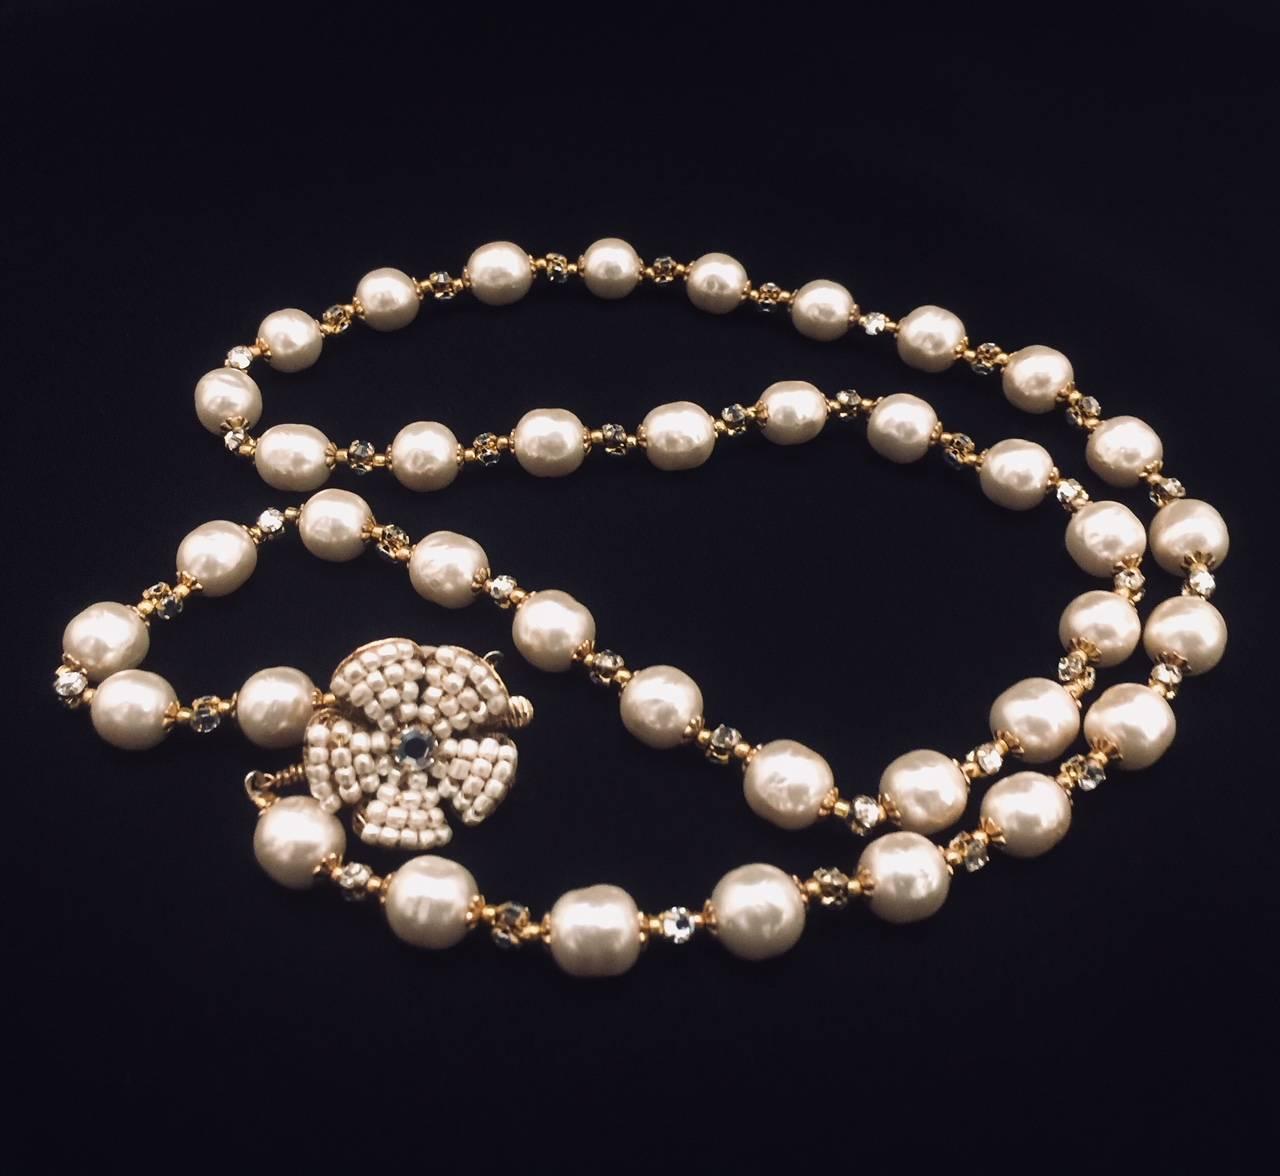 Miriam Haskell was a gifted designer of costume jewelry, designing affordable pieces from 1920 though the 1960's.  Her vintage items are eagerly collected and her namesake company lives on. This marvelous example of her work features beautifully